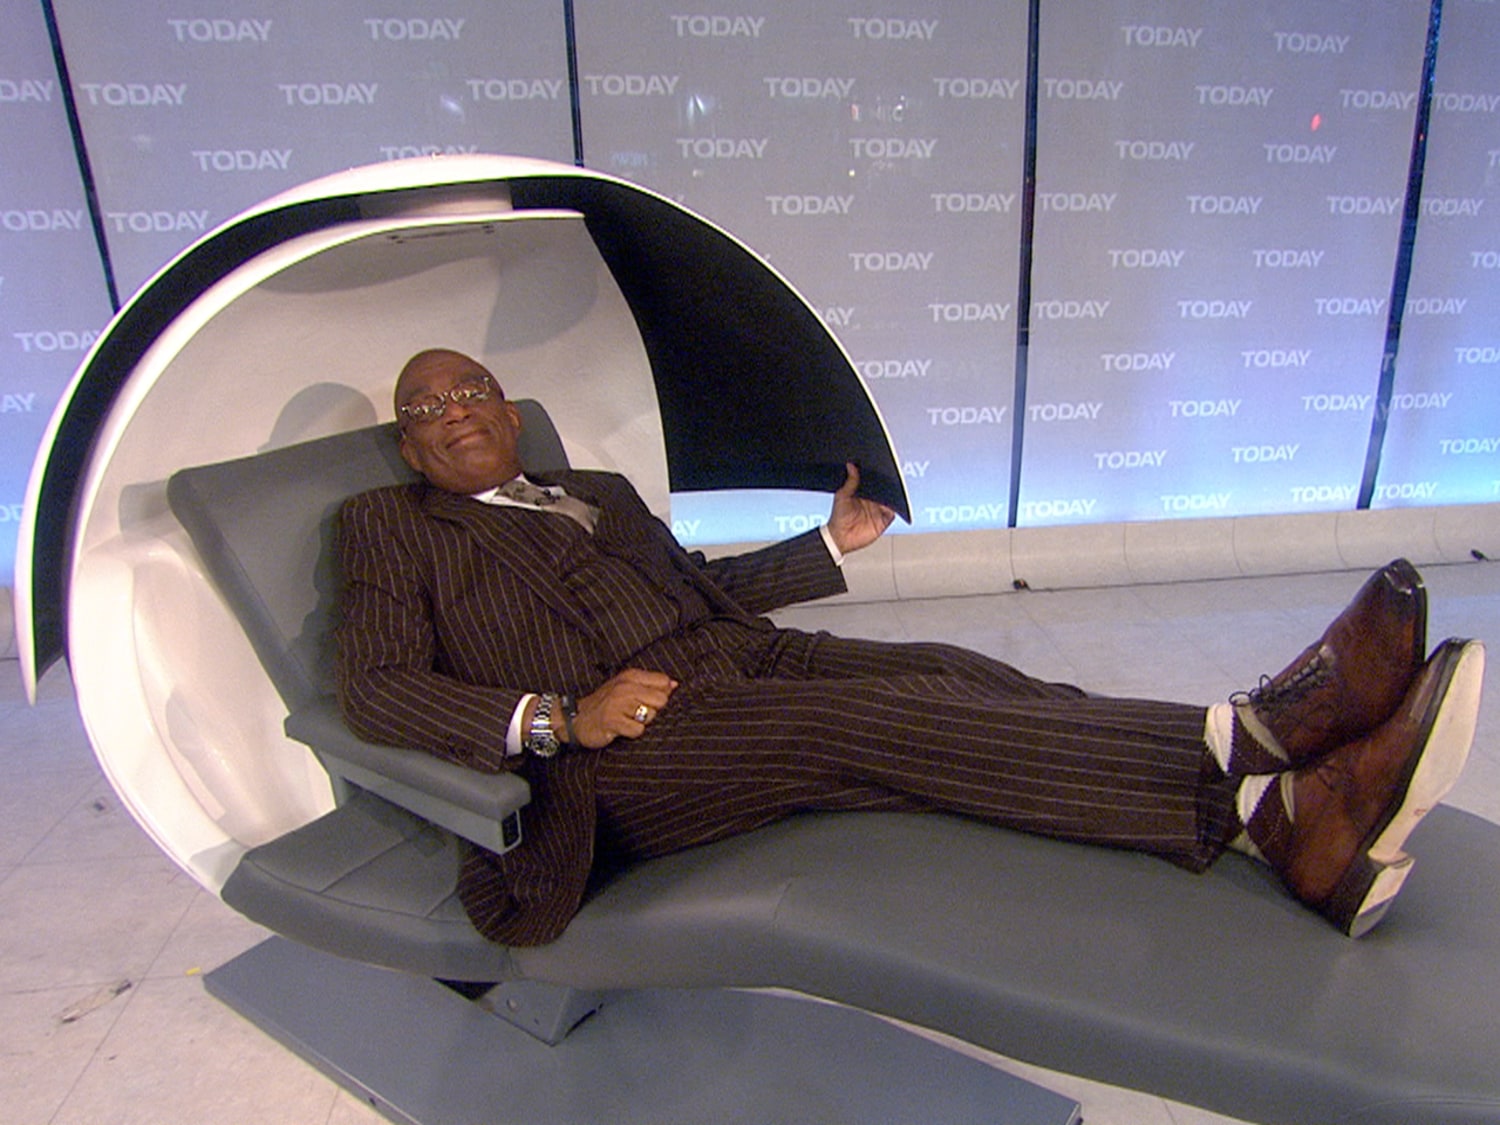 standing sleeping pods help people take power naps on their feet while in  the office or cafés